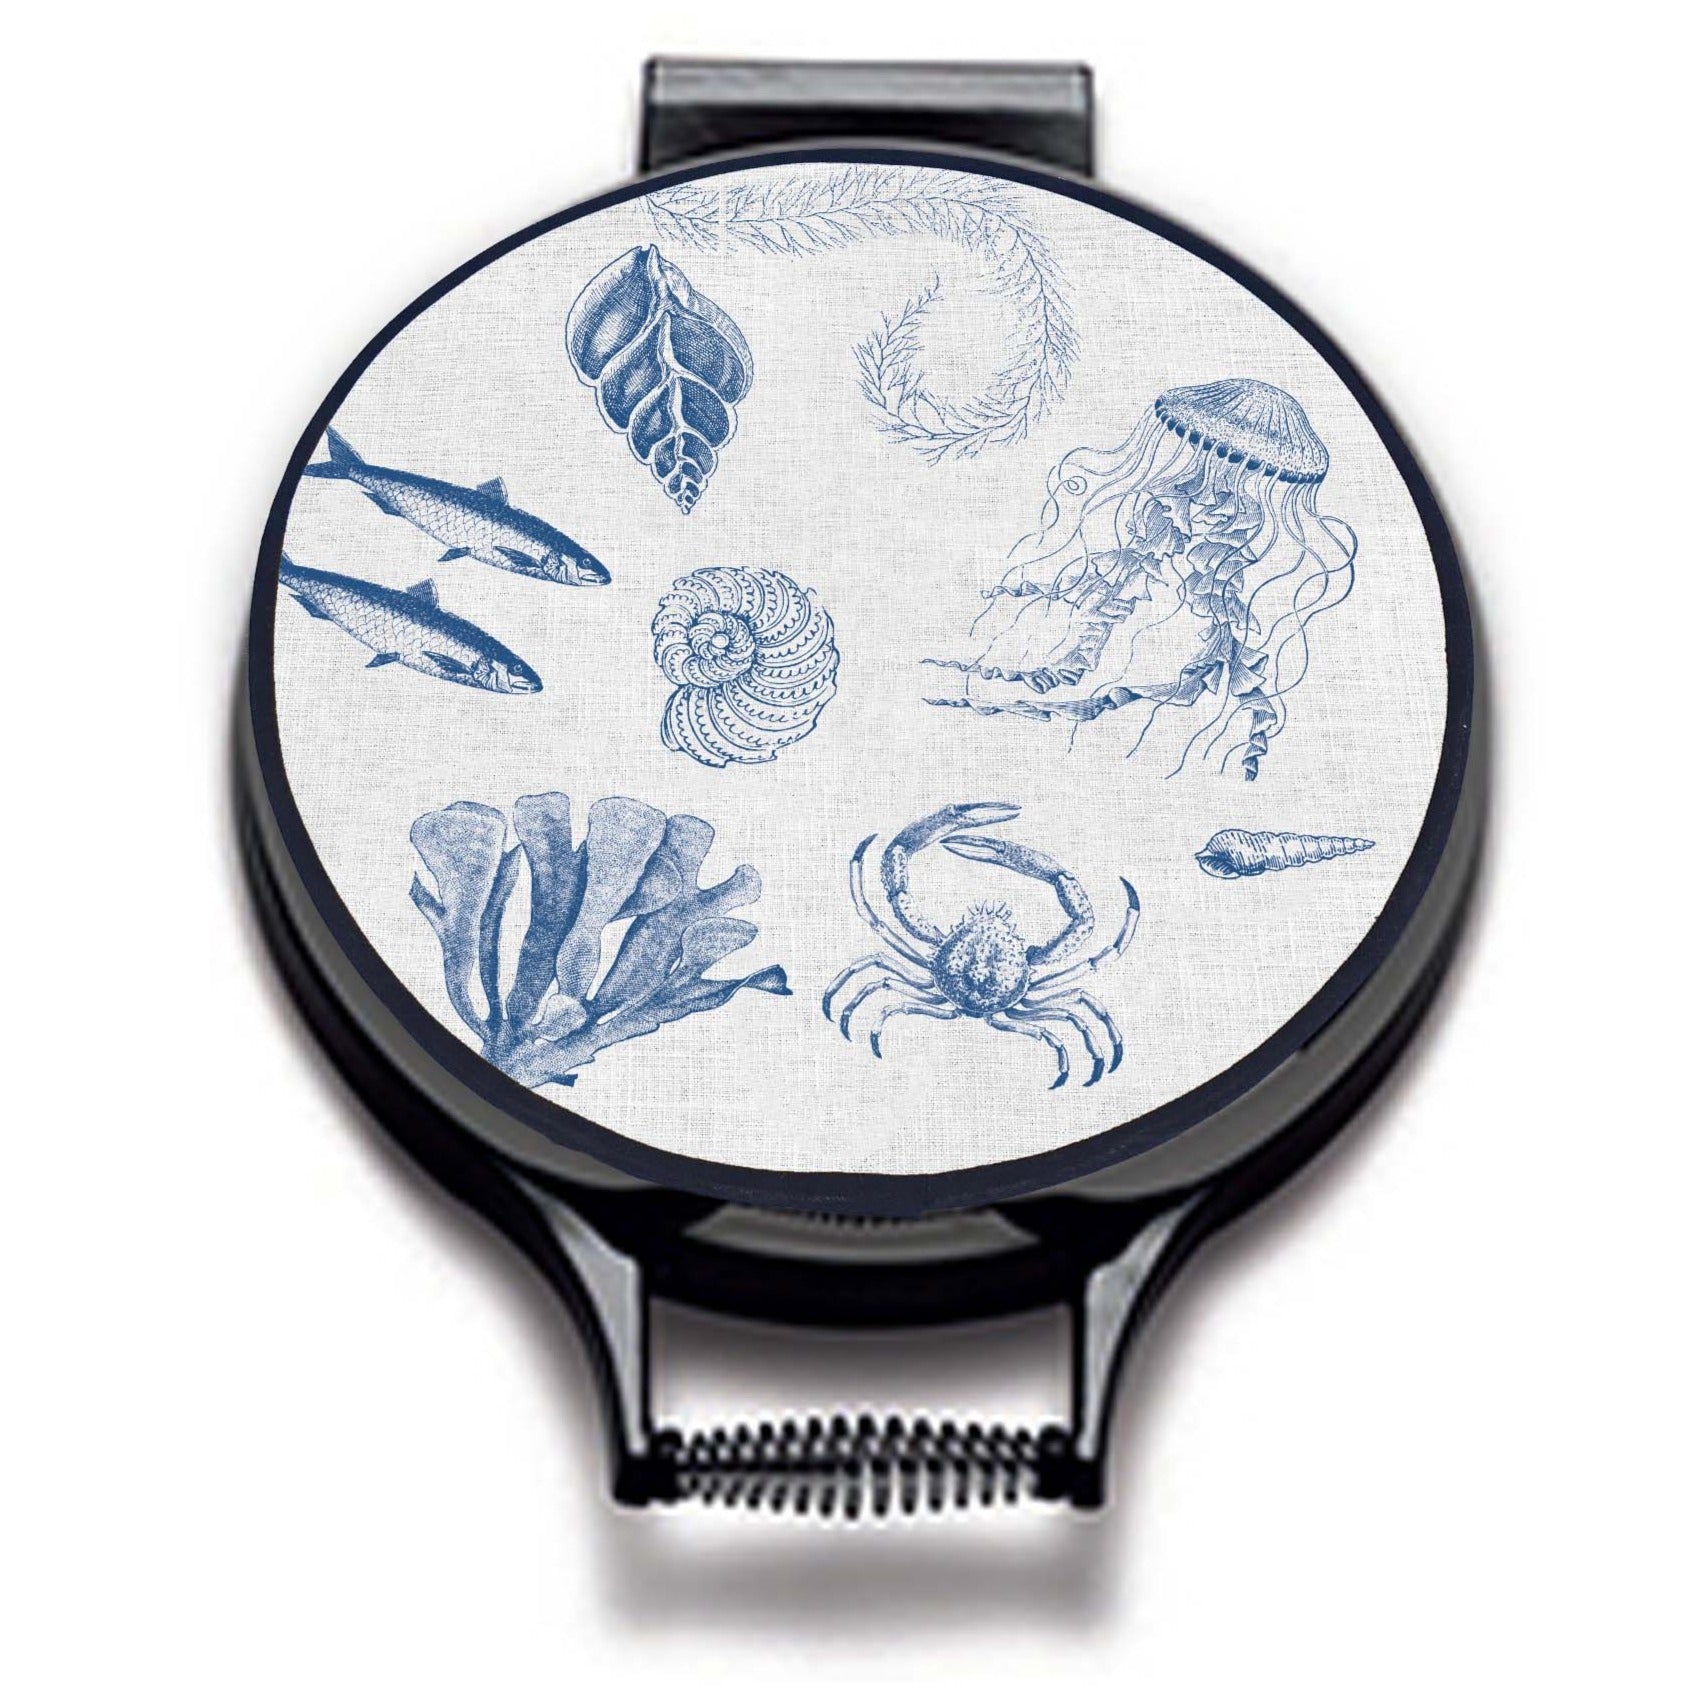 blue illustrations of sealife including fish, seaweed, shells, crabs, jelly fish, and fossils on a beige linen circular hob cover with black hemming. Pictured on metal range cooker lid on an isolated background. Mustard and Gray